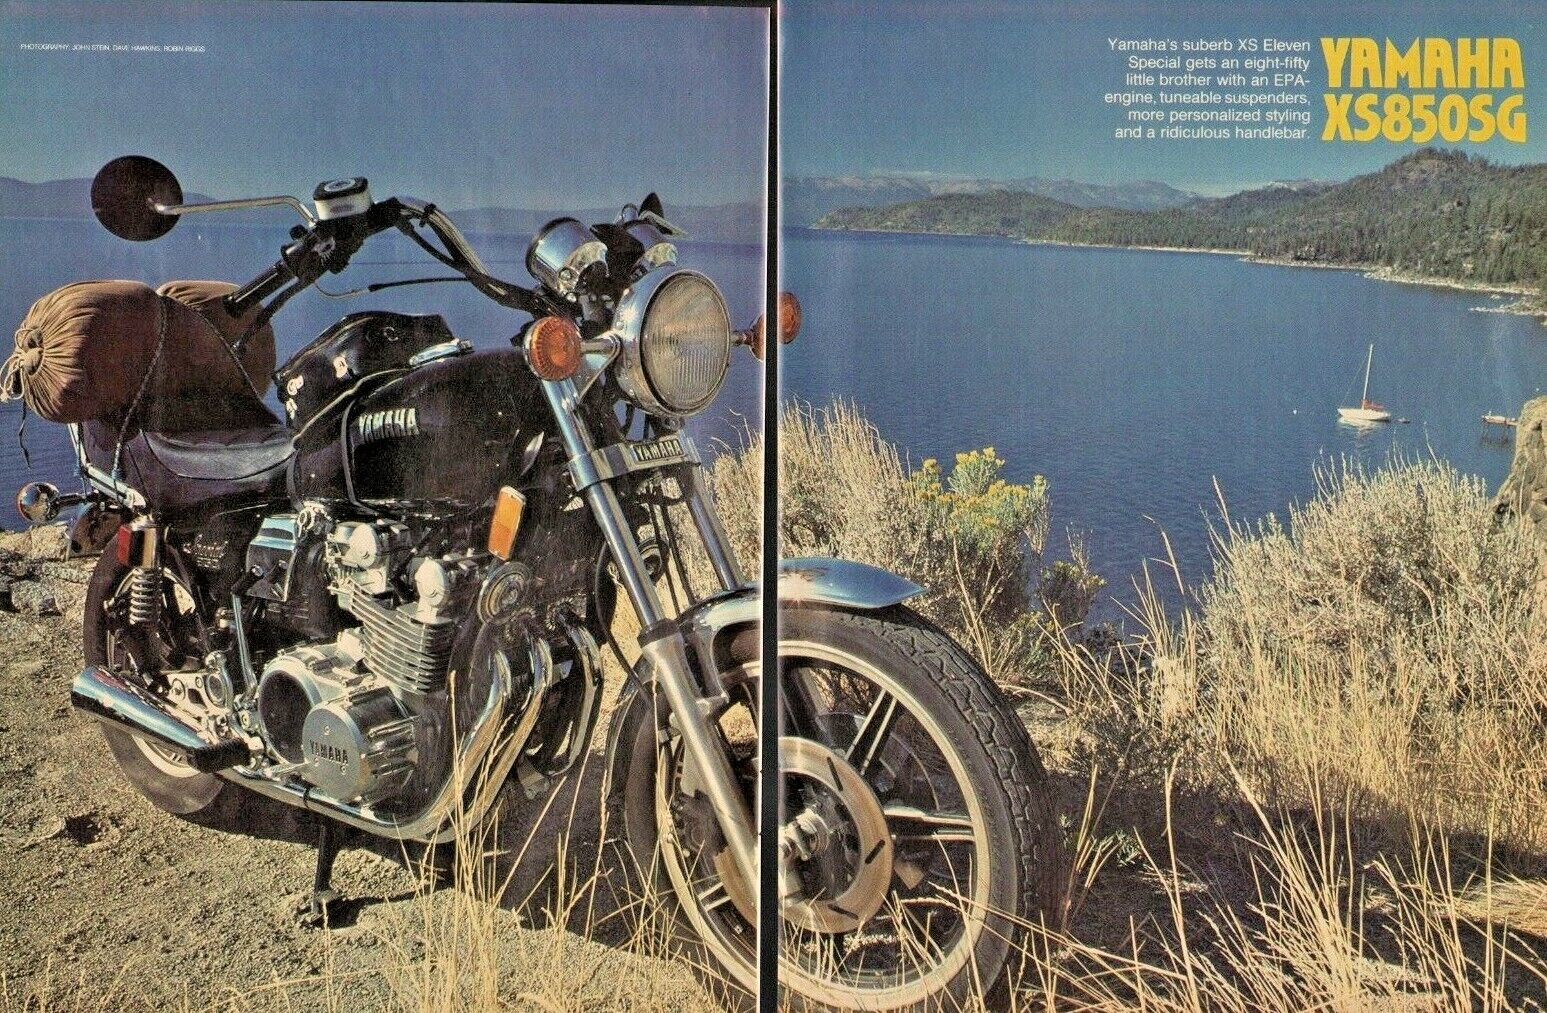 1979 Yamaha XS850SG Special - 8-Page Vintage Motorcycle Road Test Article